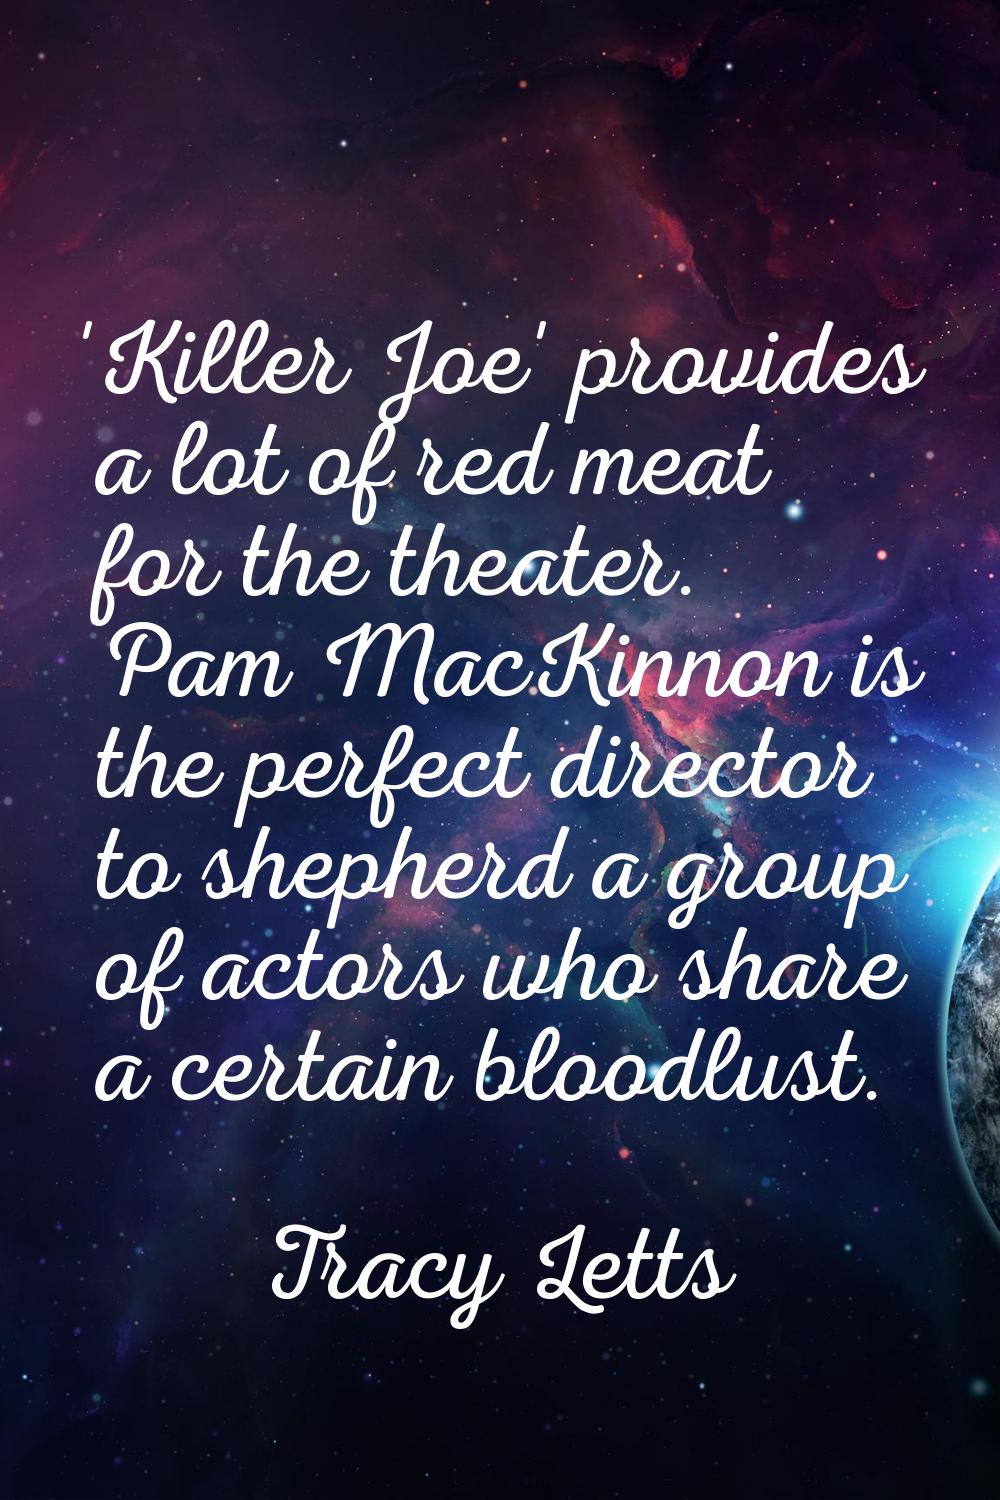 'Killer Joe' provides a lot of red meat for the theater. Pam MacKinnon is the perfect director to s